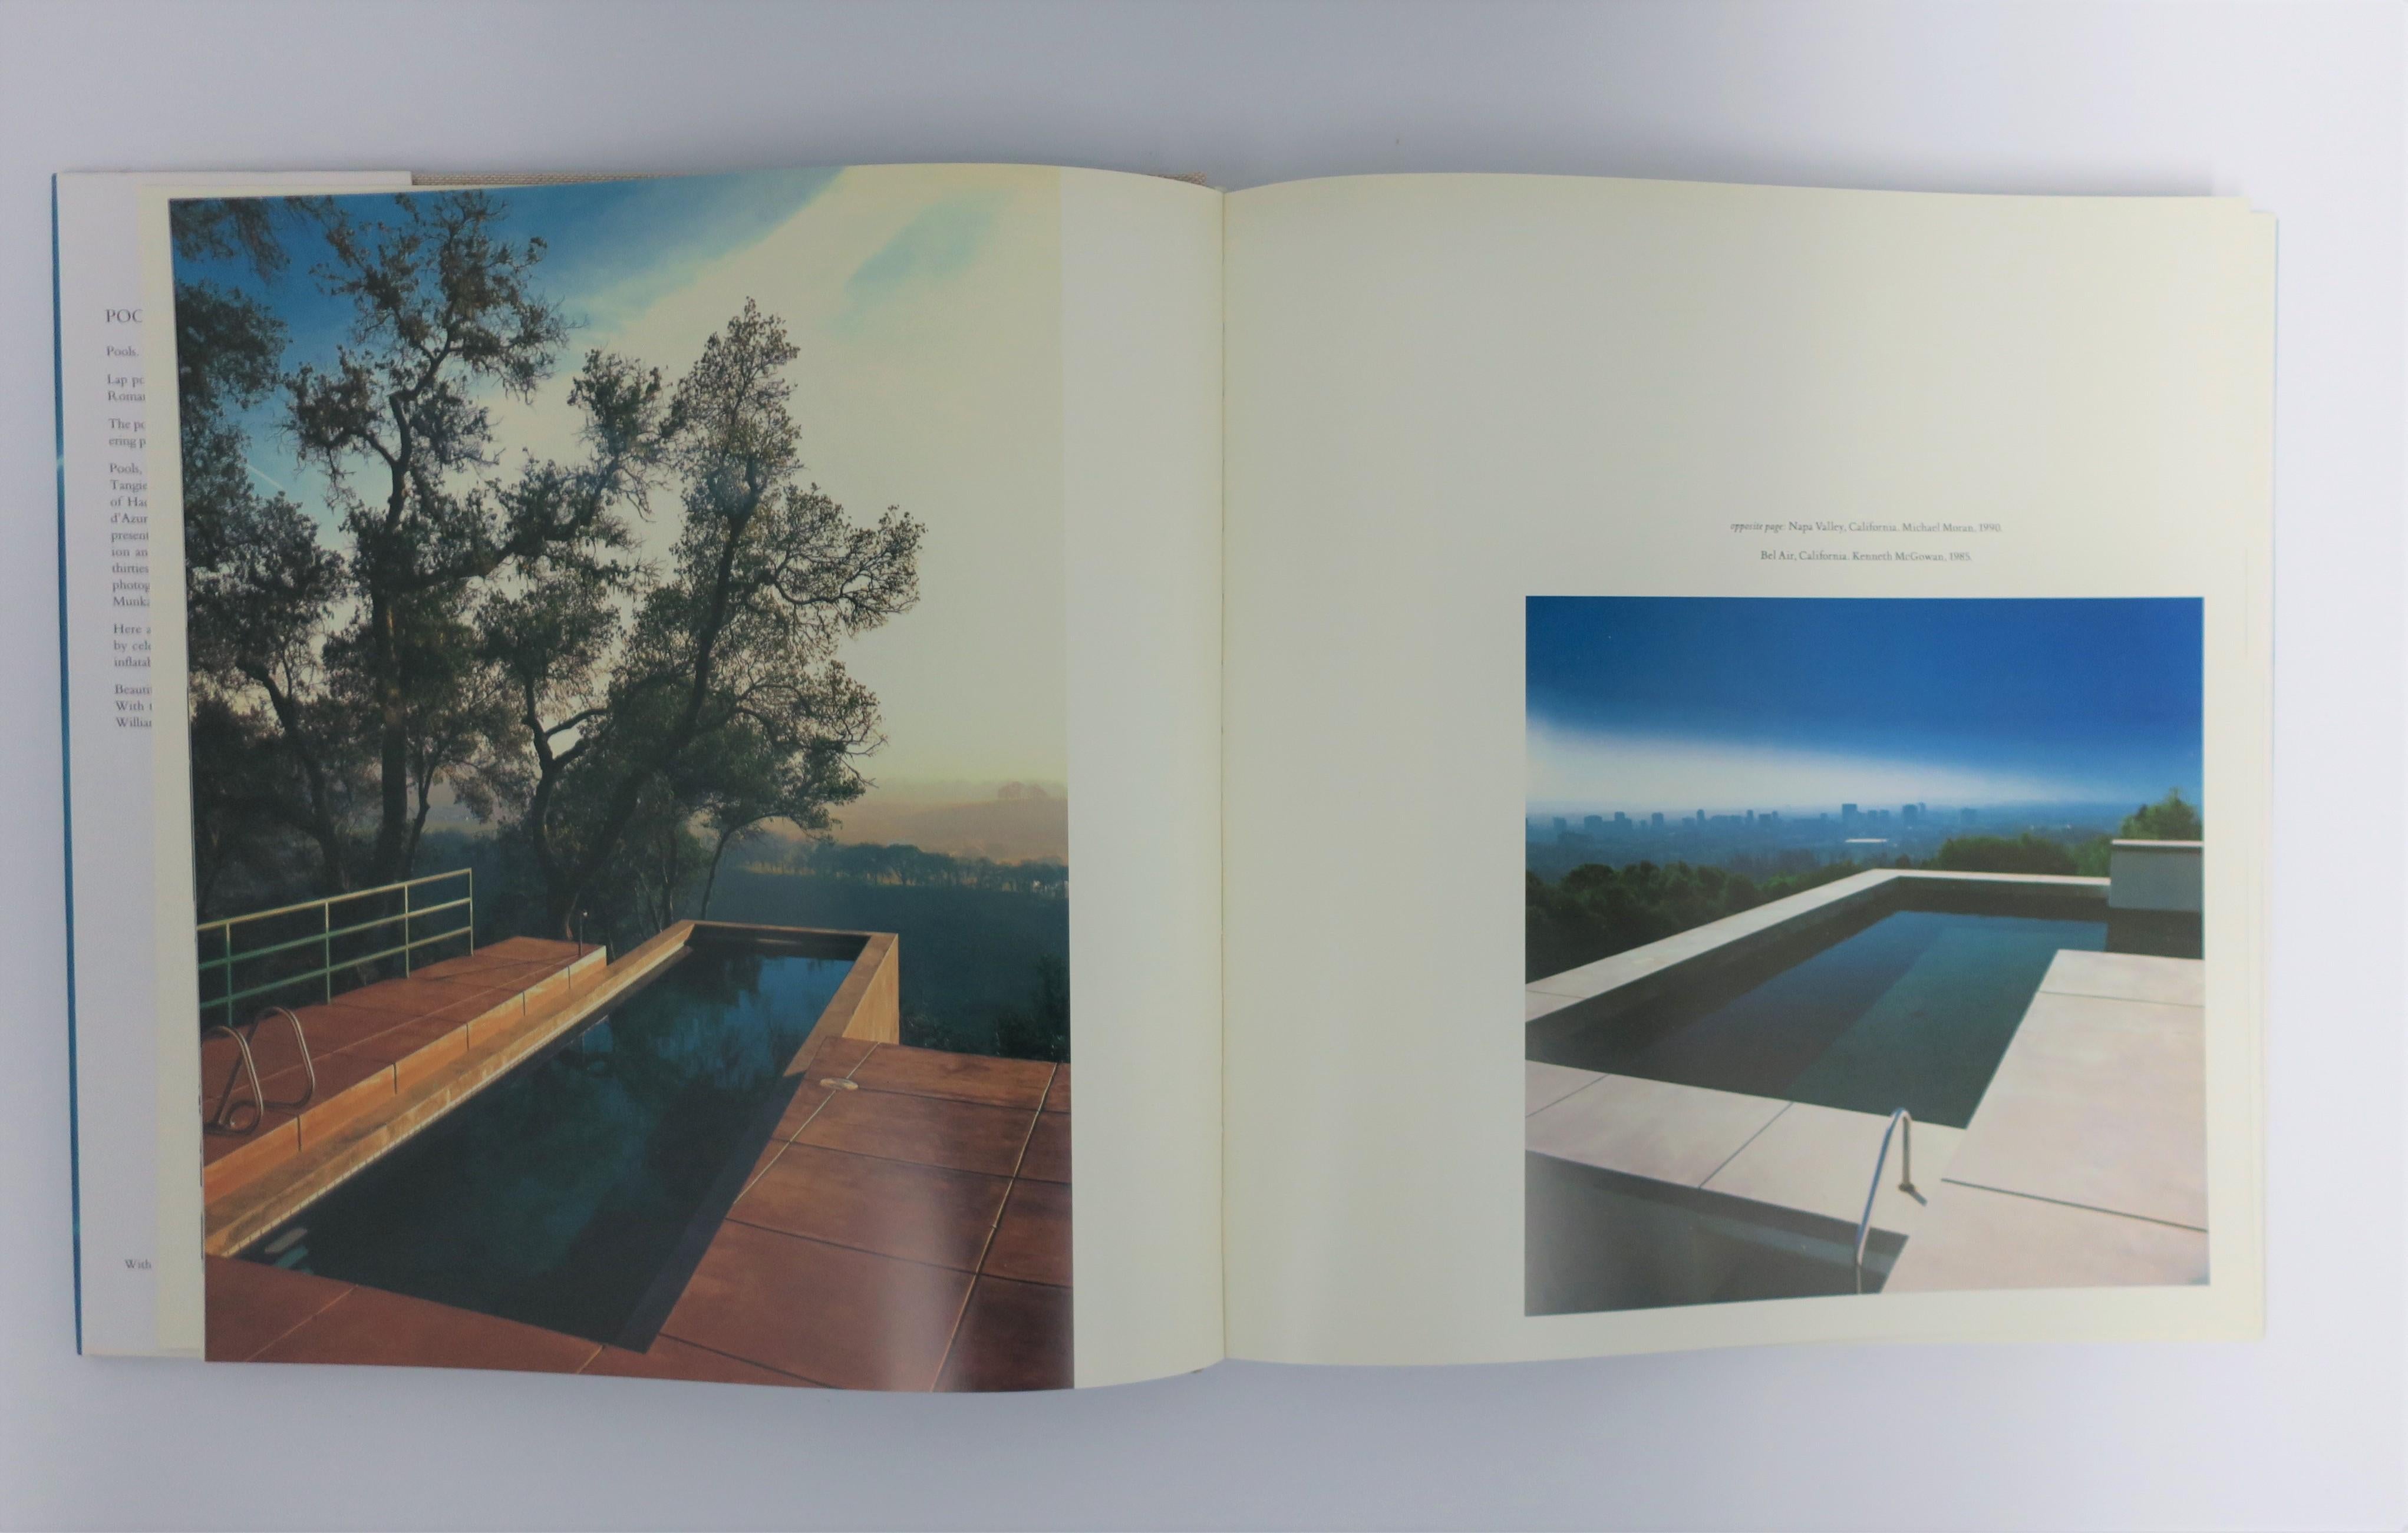 Pools by Kelly Klein an Architecture Coffee Table or Library Book 2